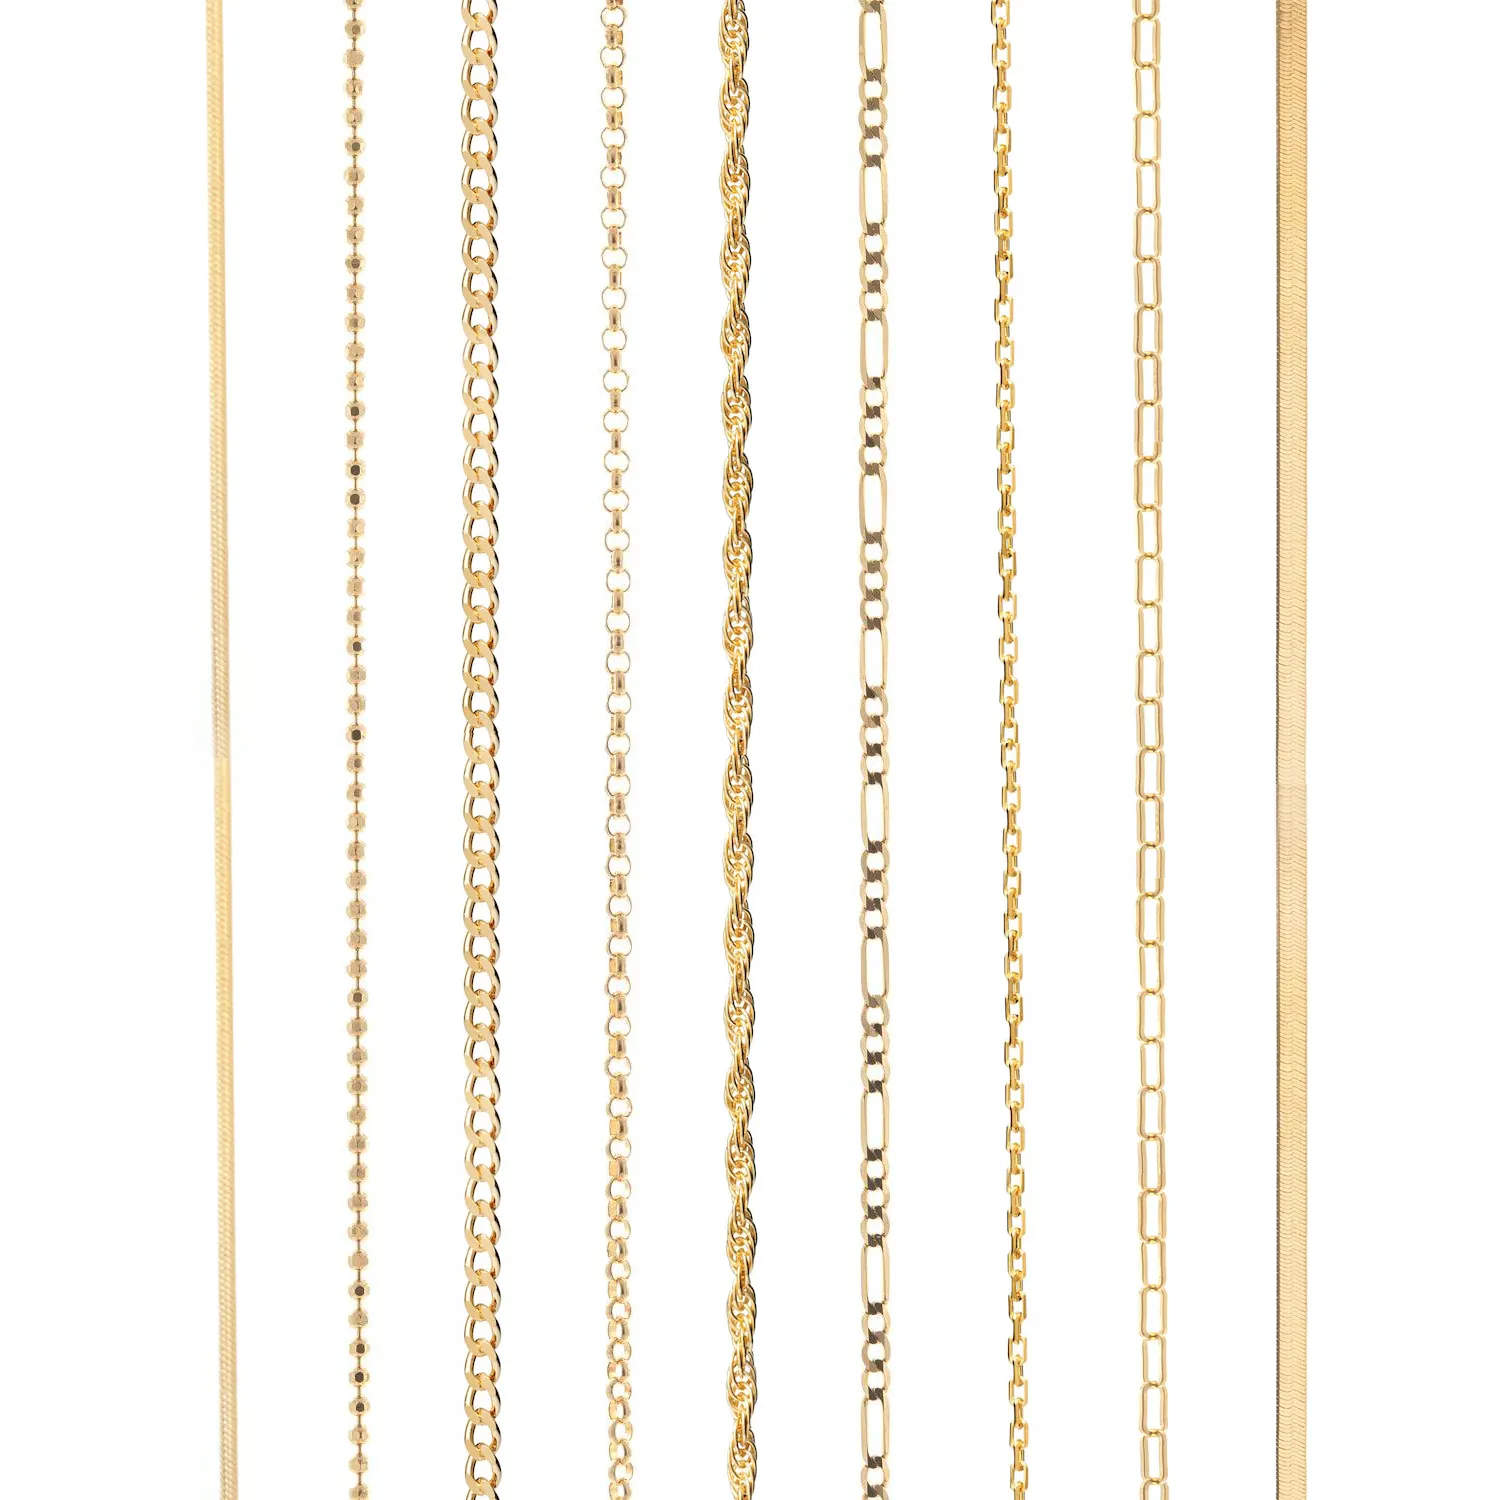 LYBURCHI jewelry mulit size available most popular gold plated and vermeil 925 sterling silver cuban link chain necklace